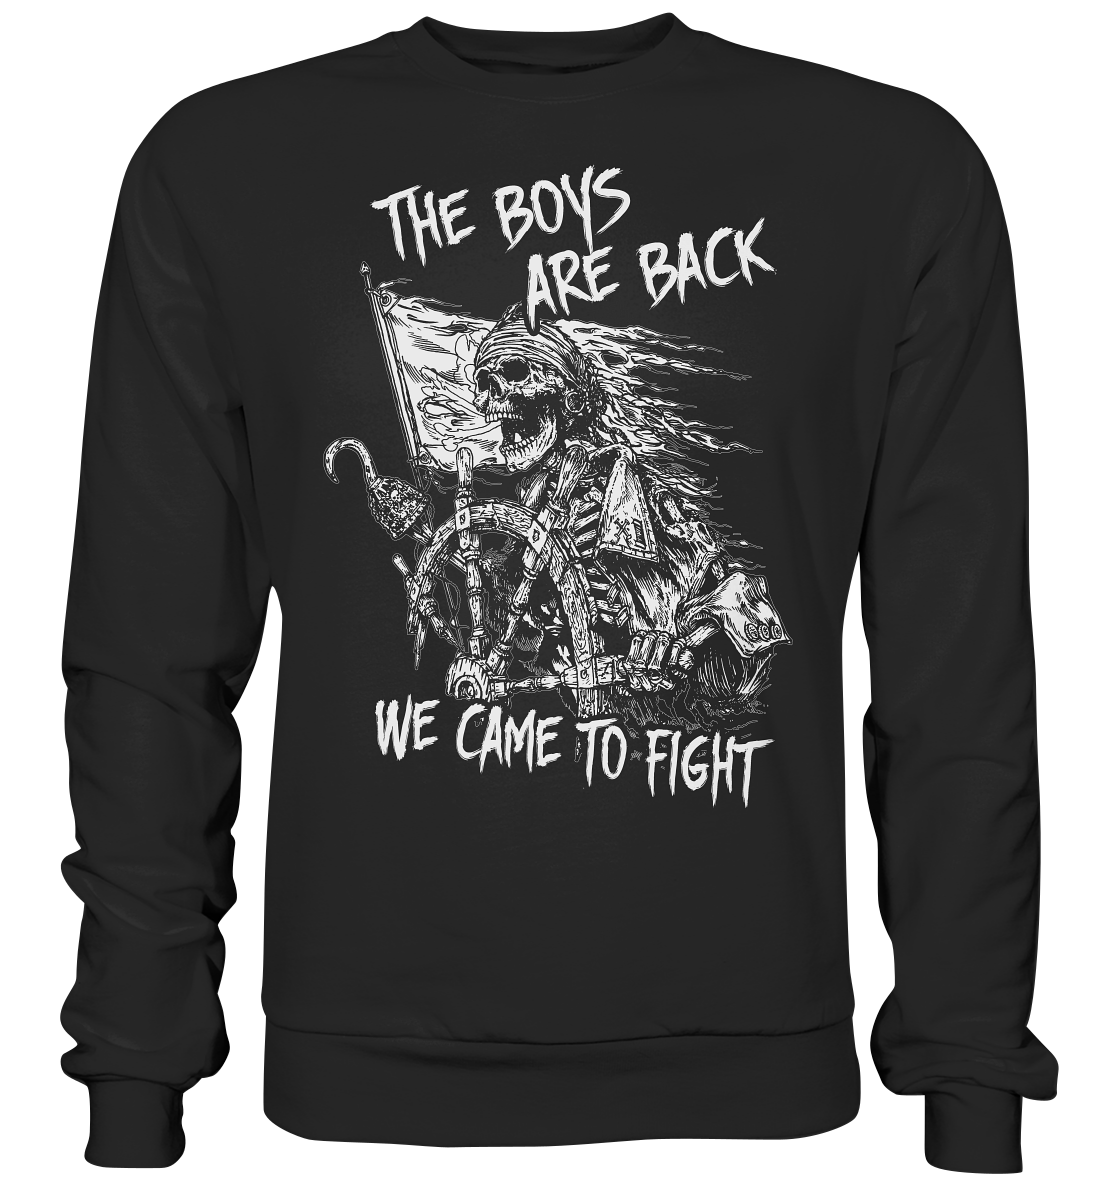 The Boys Are Back "We Came To Fight" - Premium Sweatshirt